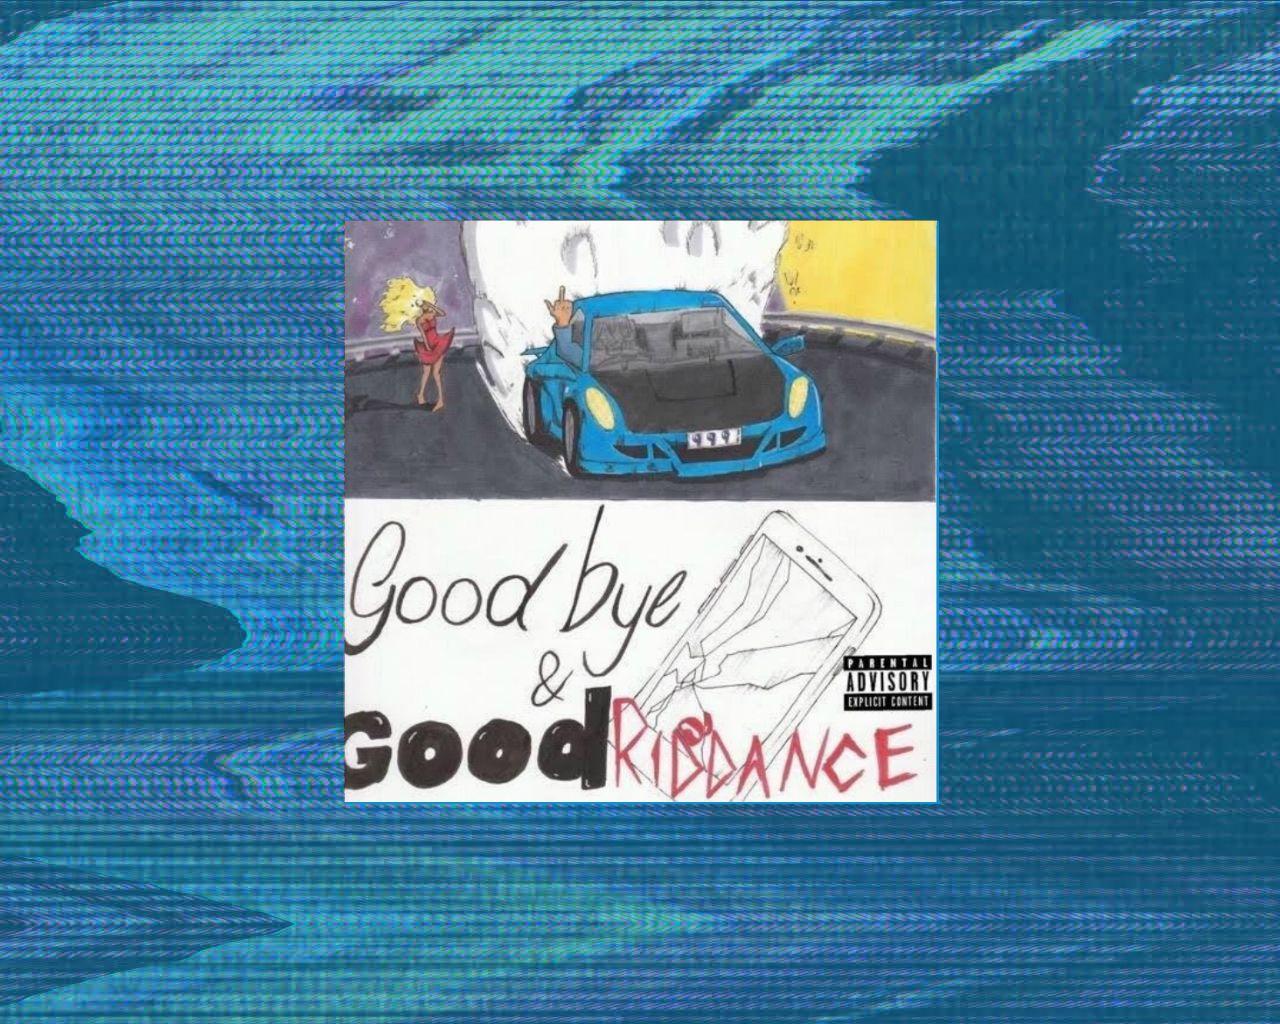 HD goodbye and good riddance wallpapers  Peakpx